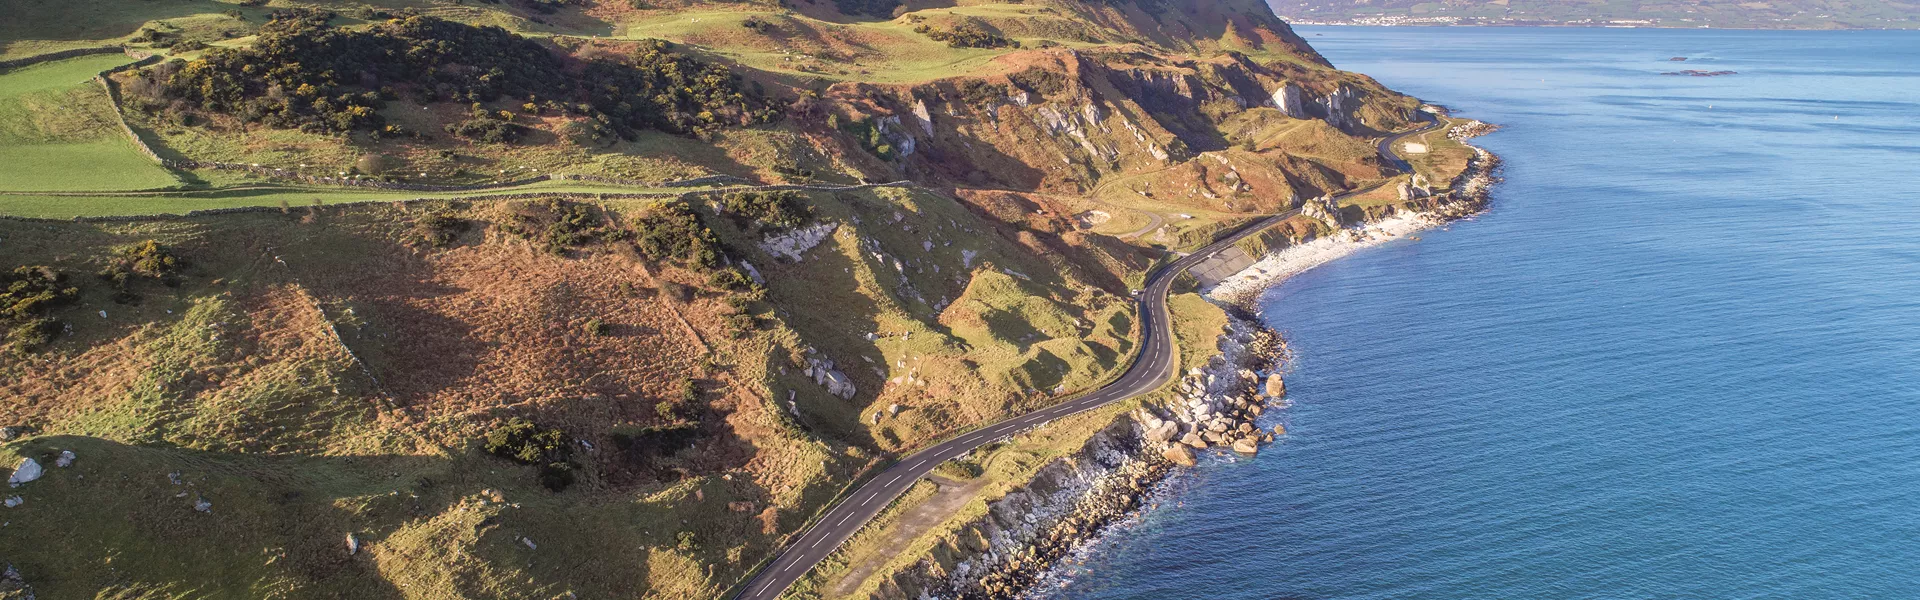 Tailor your custom Ireland and Scotland luxury vacation - Causeway Coastal Route in Northern Ireland 